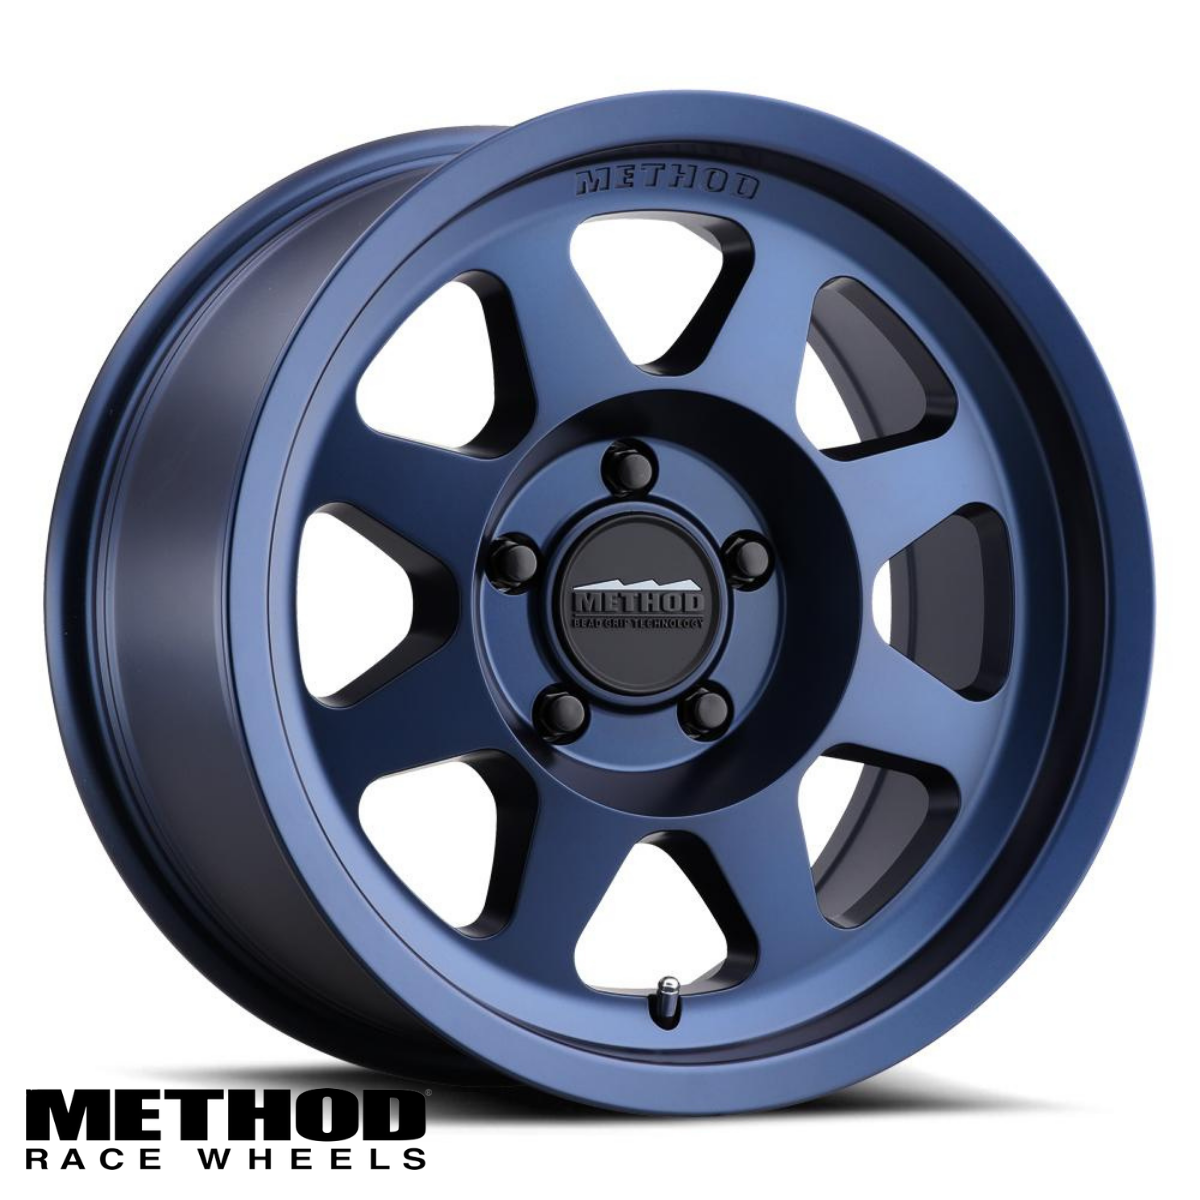 Upgrade Your Ride With Method Race Wheels